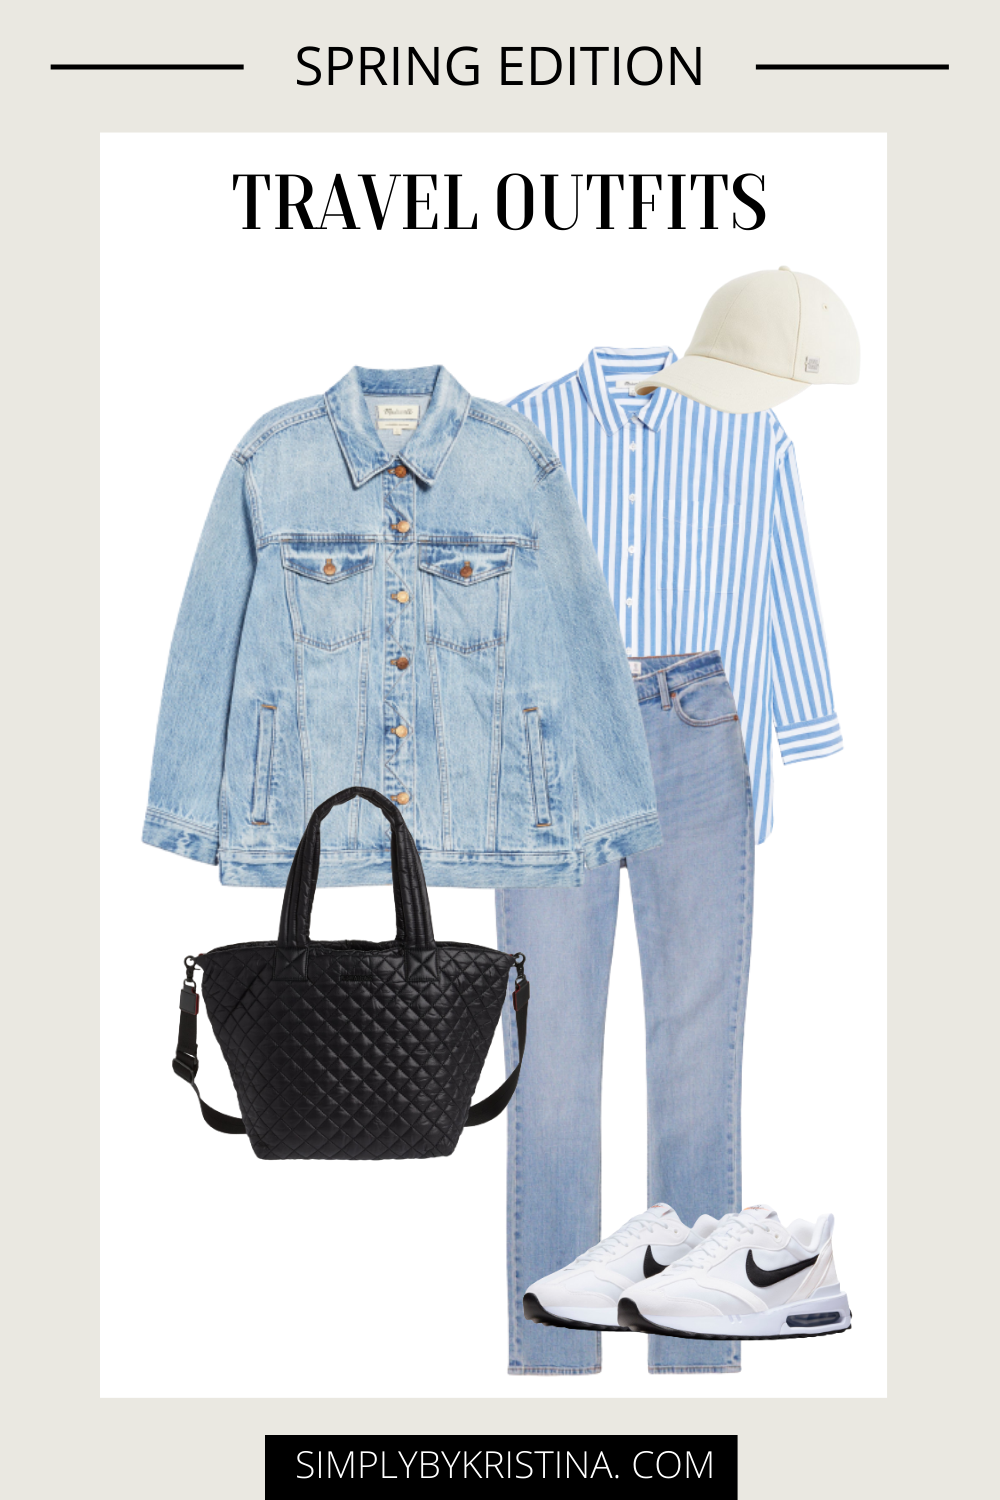 10 Cute Airport Outfit Ideas for Women - What to Wear on a Plane